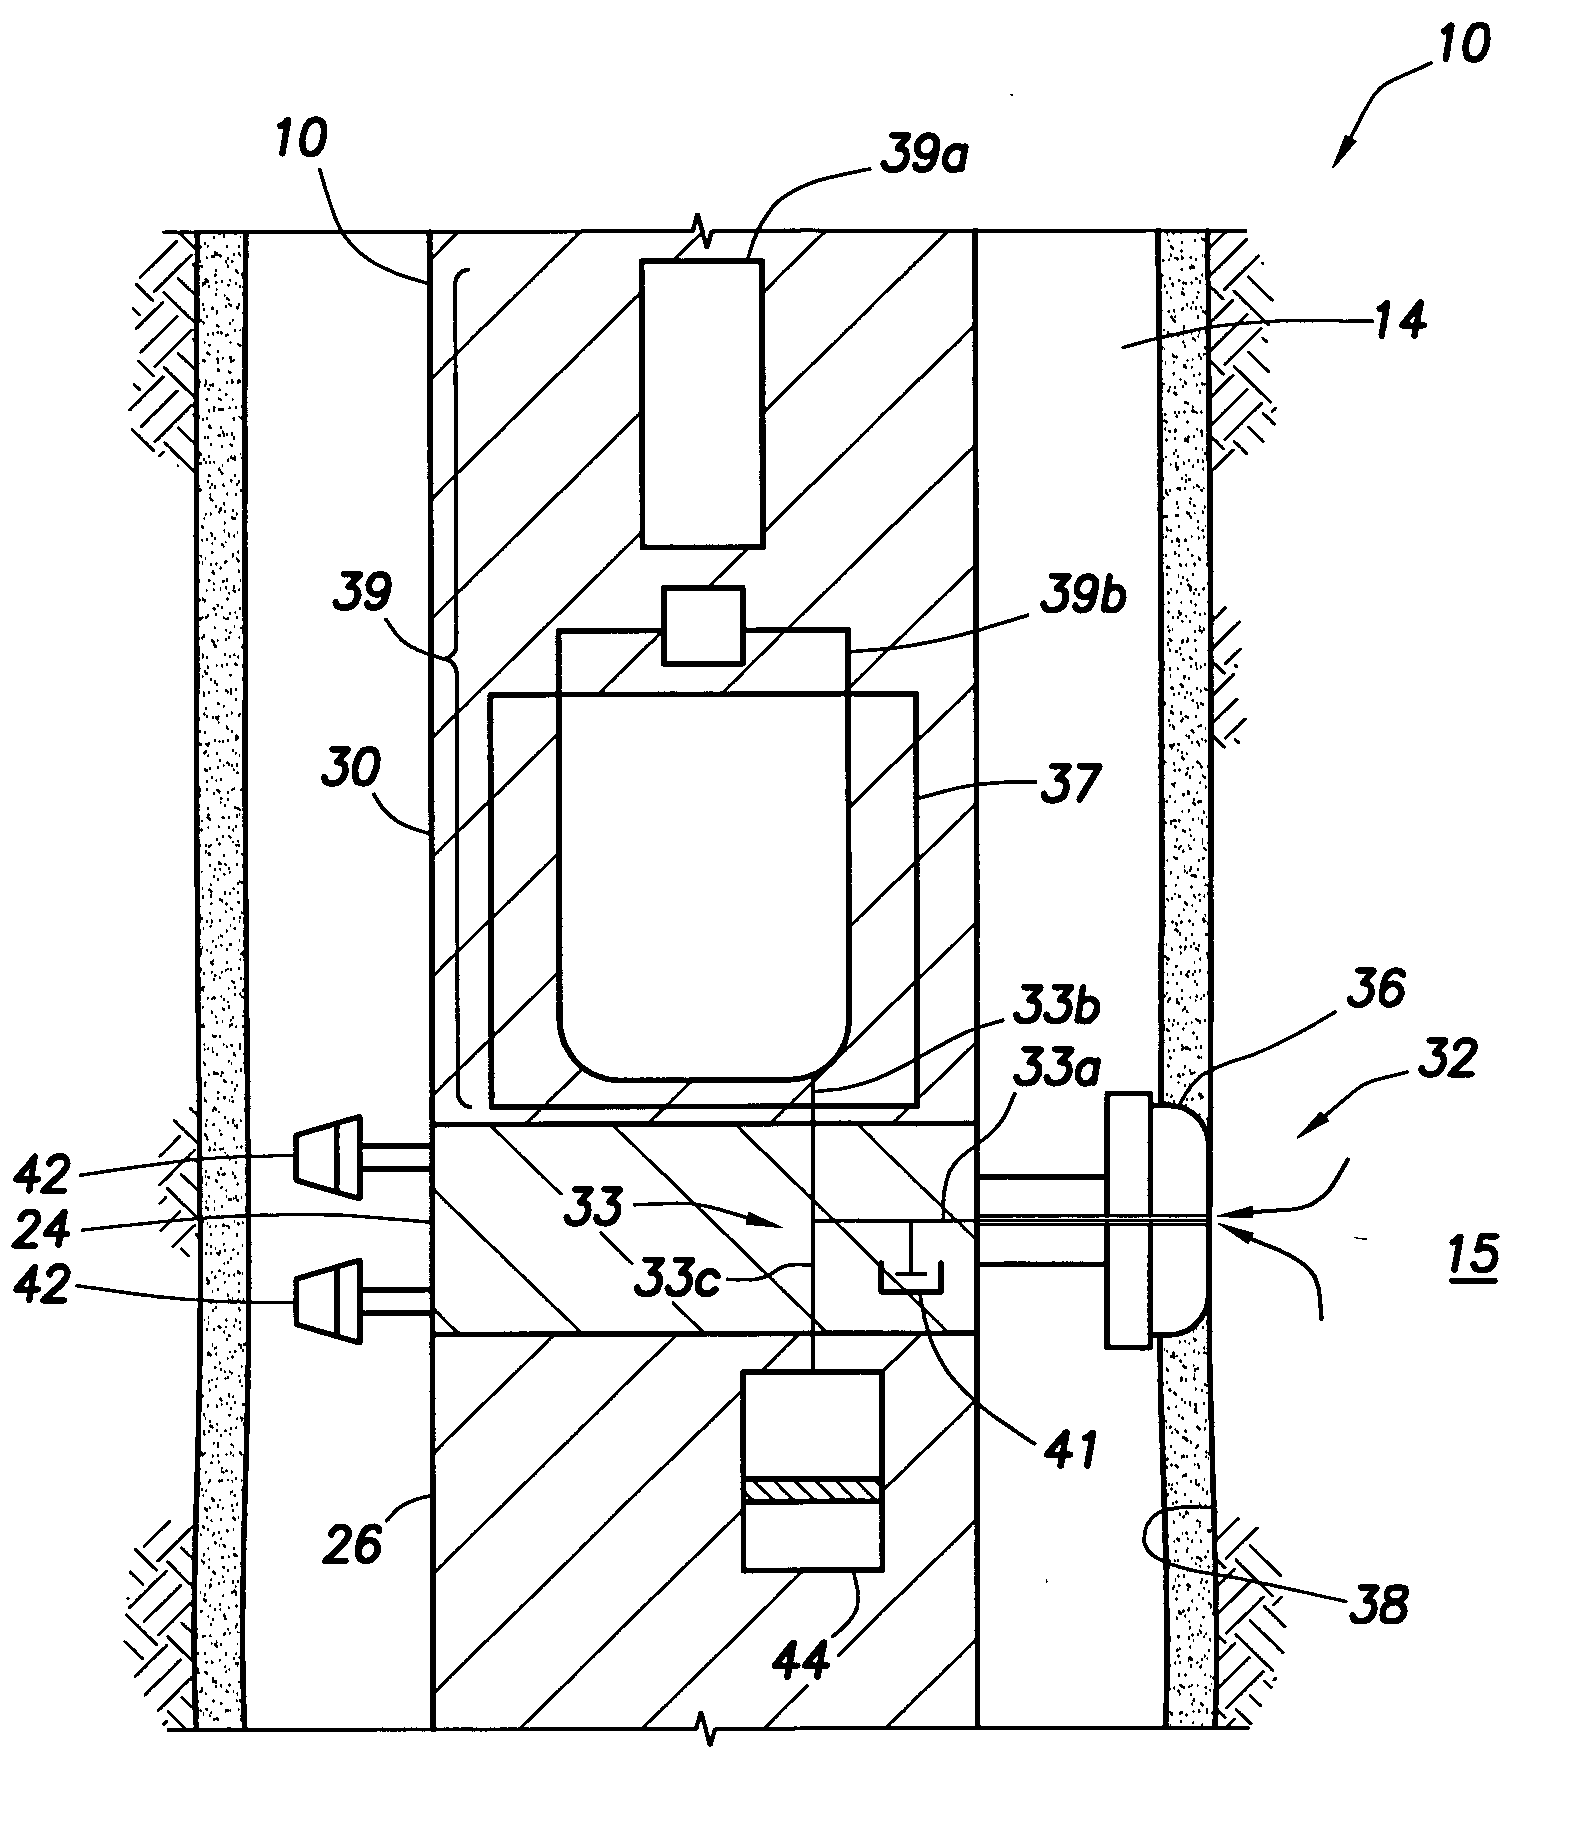 Wellbore formation evaluation system and method